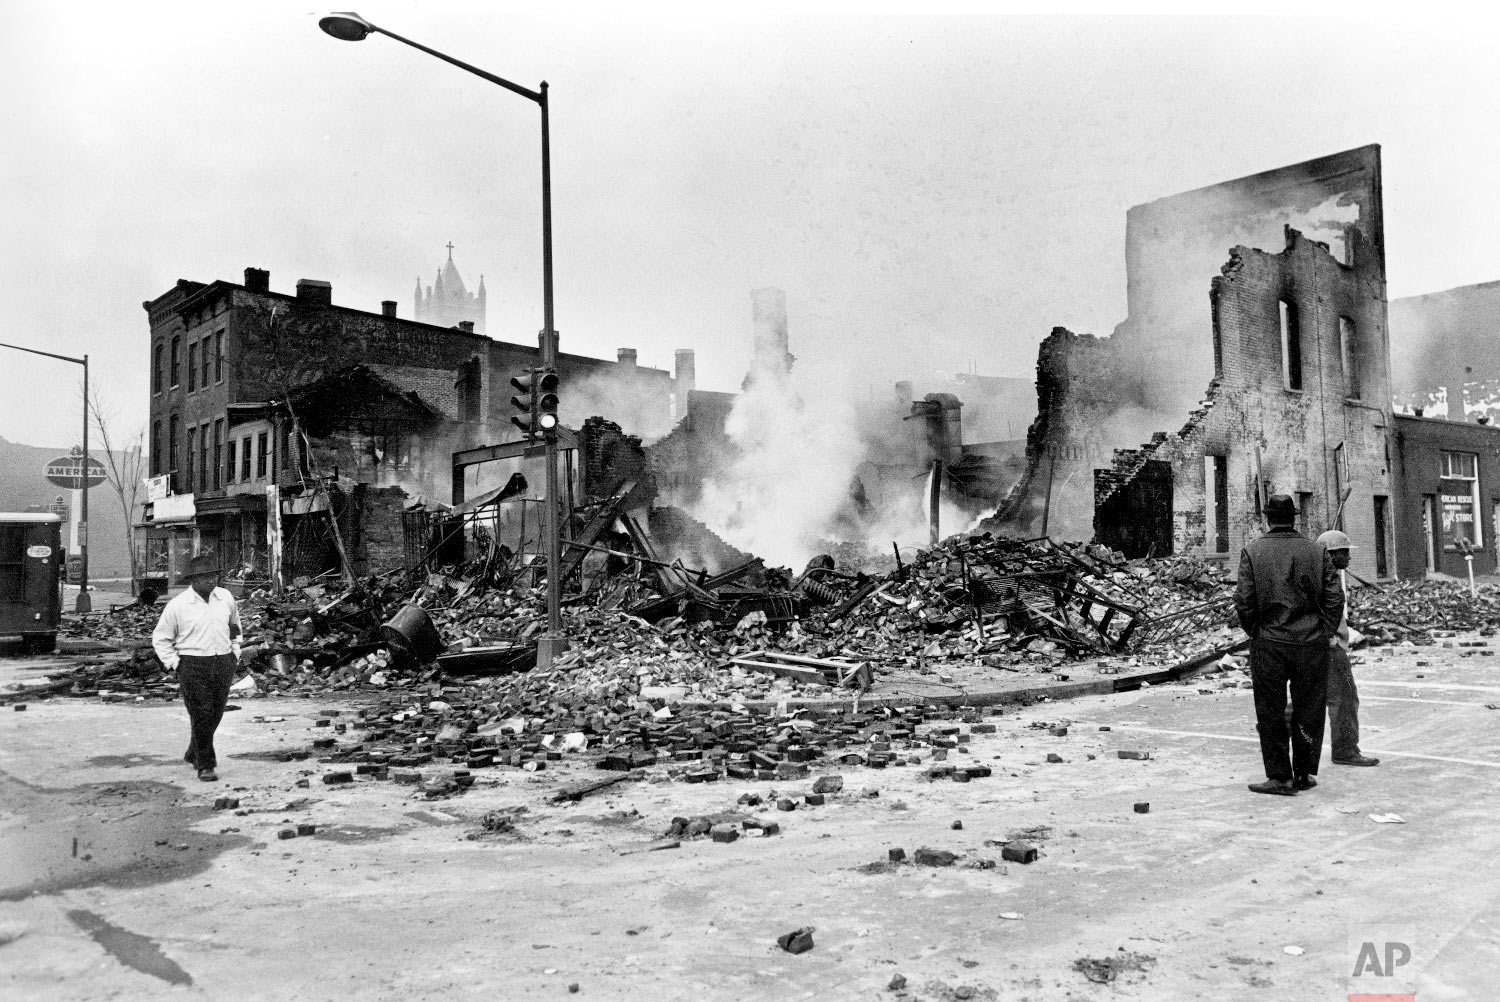  7th and O street NW, 1968. Smoldering ruins remain where a building stood on 7th Street, N.W. in Washington, D.C., April 6, 1968. Numerous fires accompanied the second night of turmoil in the nation's capital following the assassination of Dr. Marti